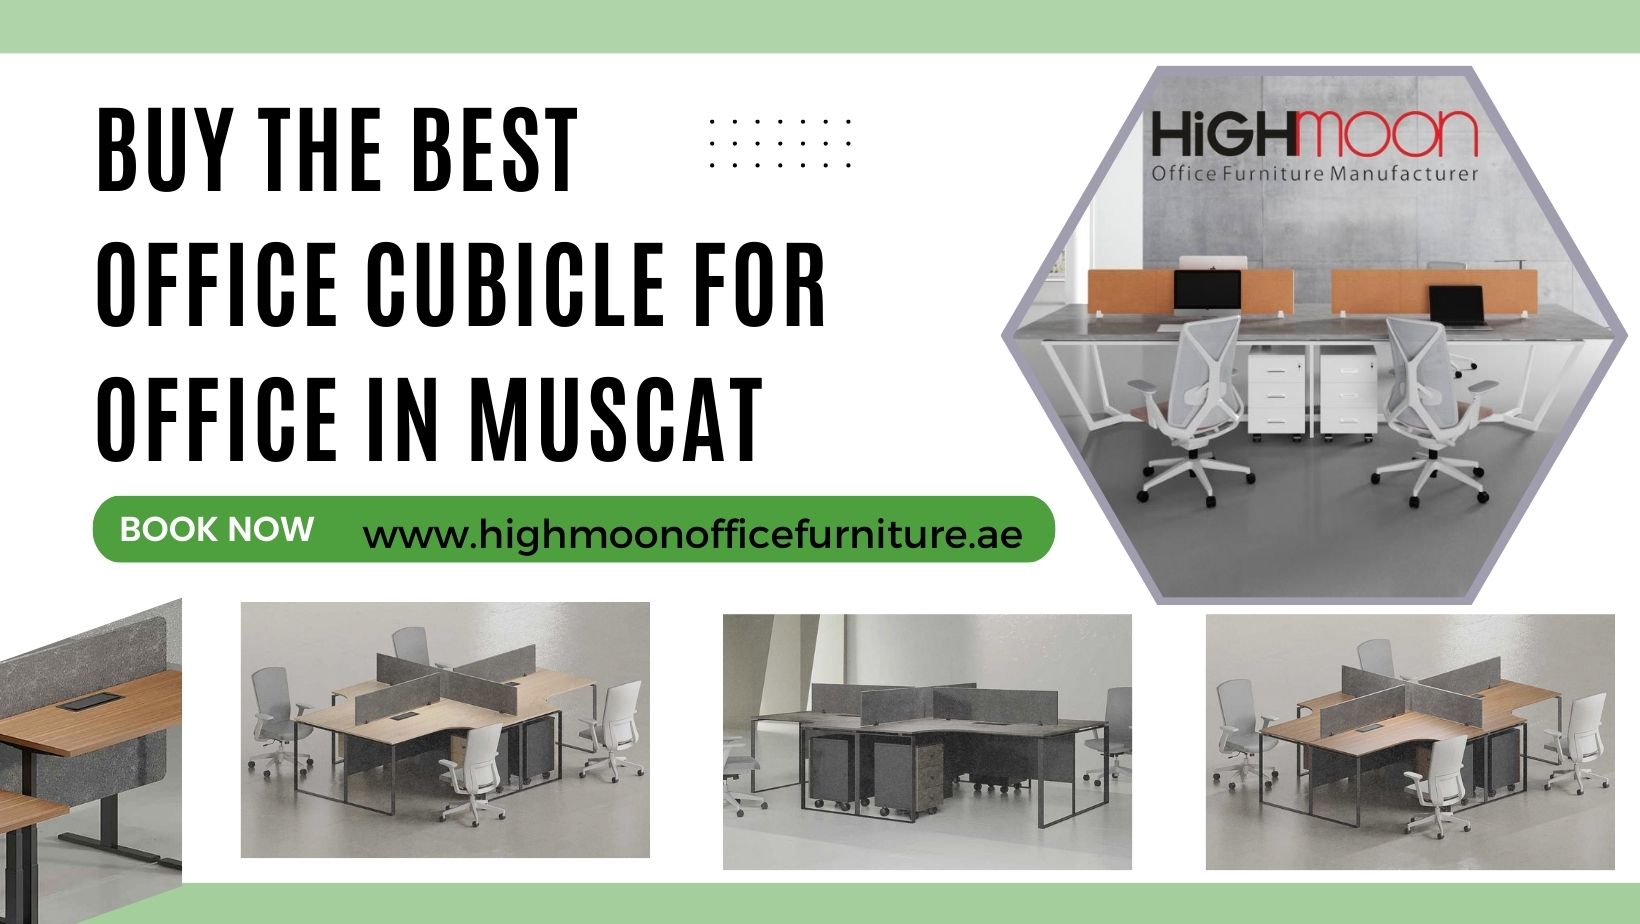 Buy the Best Office Cubicle for Office in Muscat